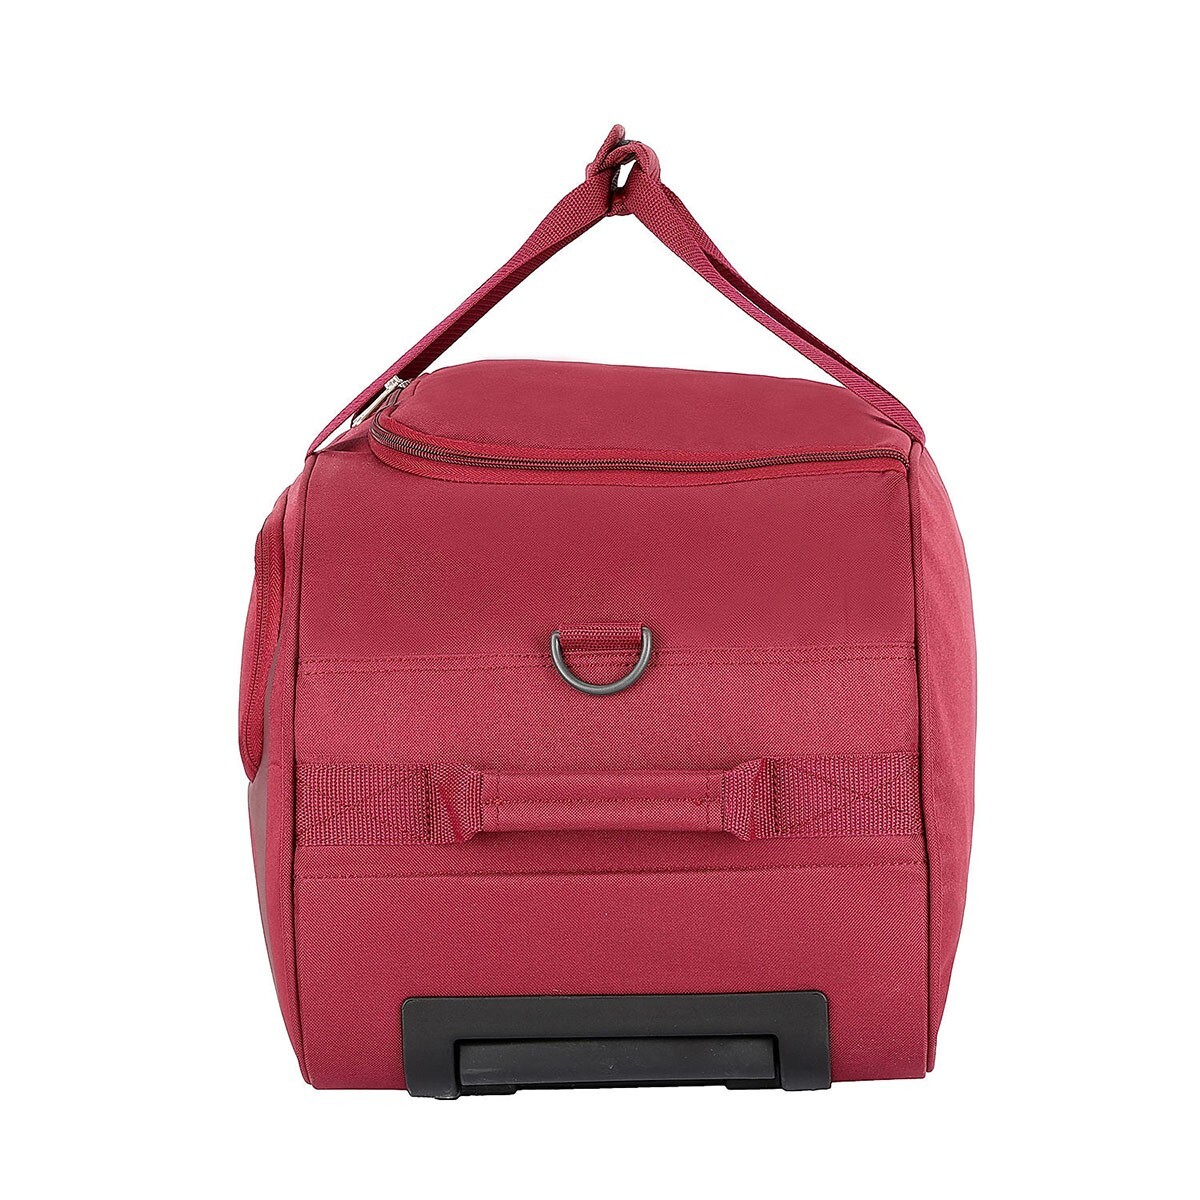 American Tourister Duffel Trolley Tride 55cm 01 Red